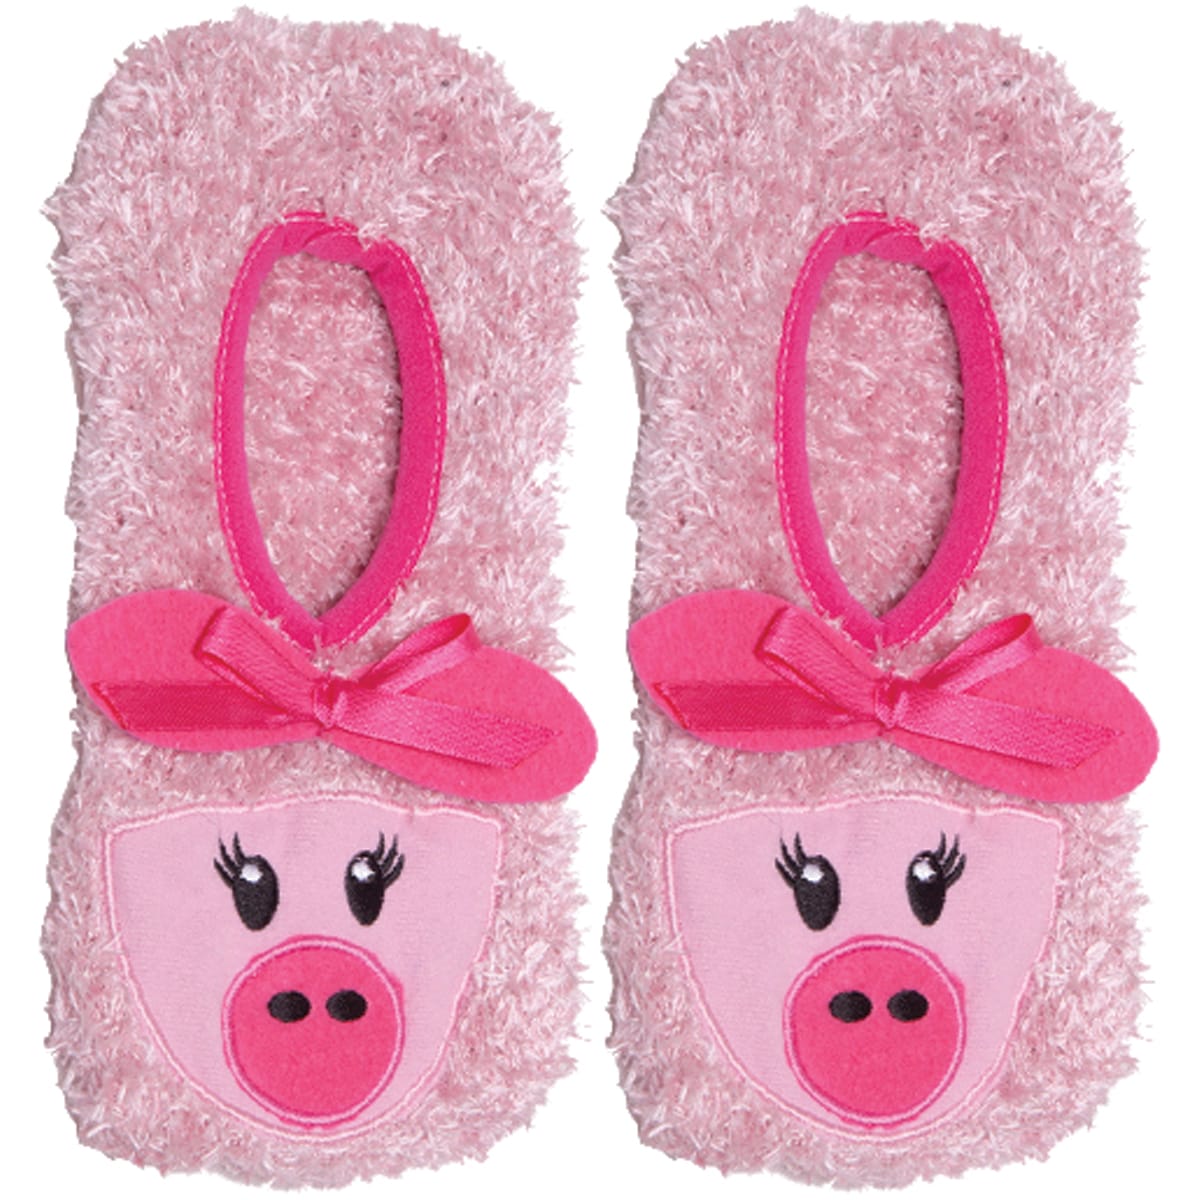 Novelty Slippers pink Pig